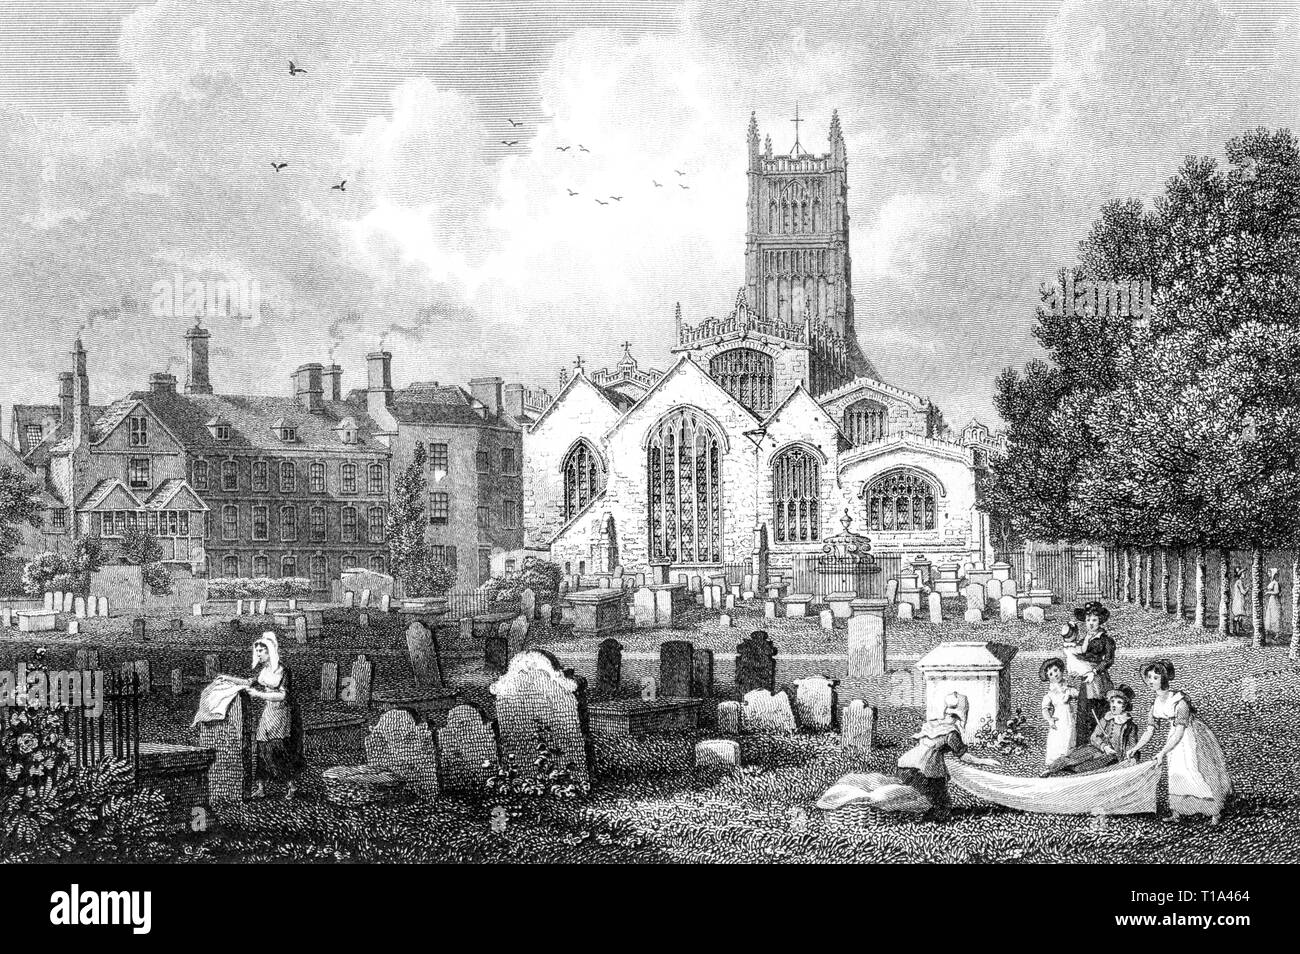 An engraving of Cirencester Church, Gloucestershire UK scanned at high resolution from a book published in 1825. Believed copyright free. Stock Photo